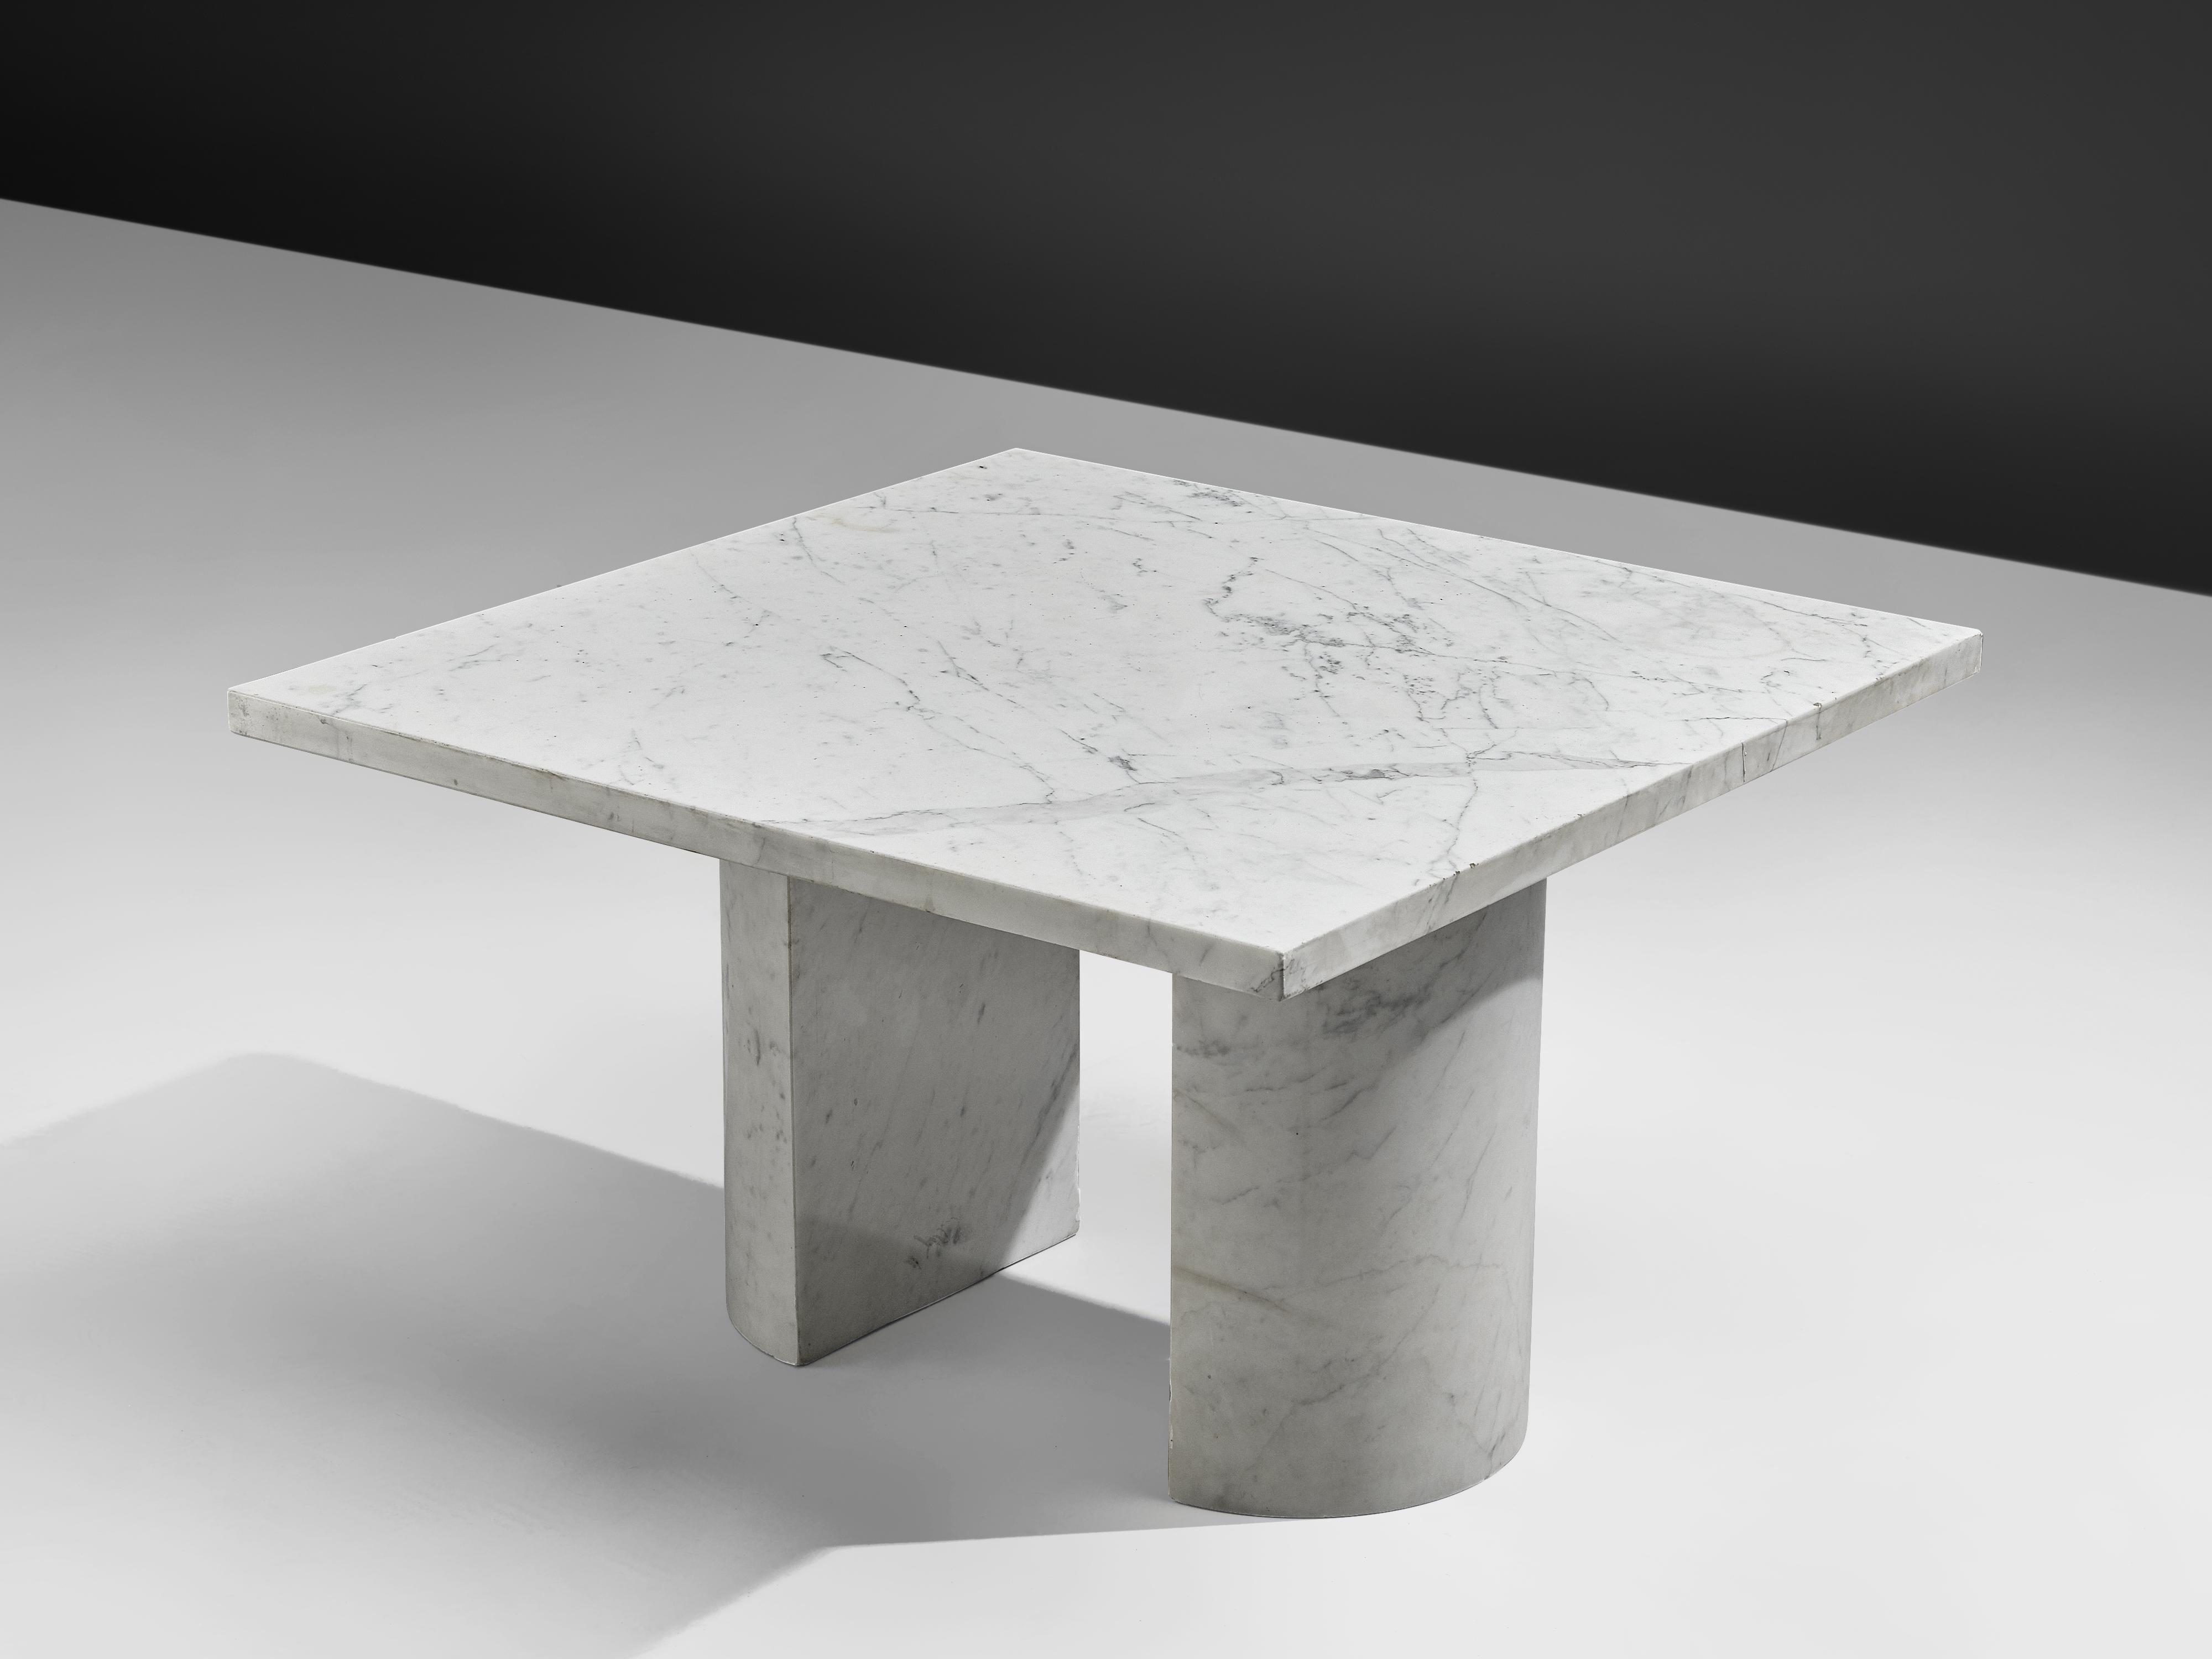 Coffee table, marble, Italy, 1970s

This cocktail table features a rectangular shaped marble tabletop. The top is supported by two semi-circular columns. The aesthetics are archetypical for postmodern design, bearing references to architectural